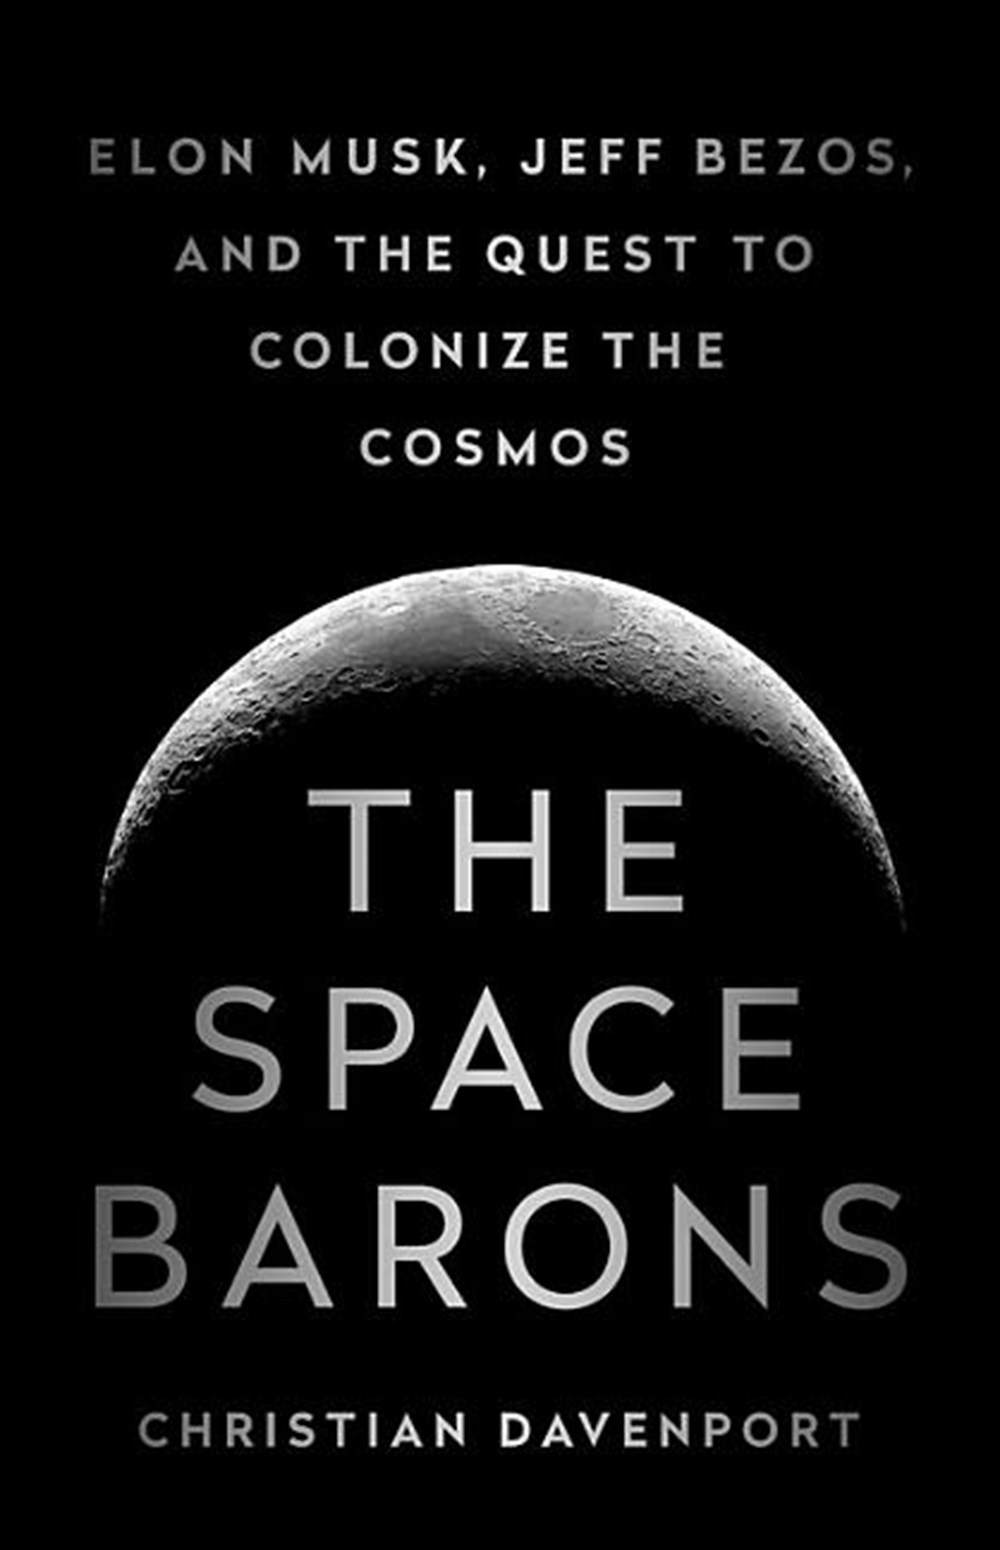 Space Barons Elon Musk, Jeff Bezos, and the Quest to Colonize the Cosmos